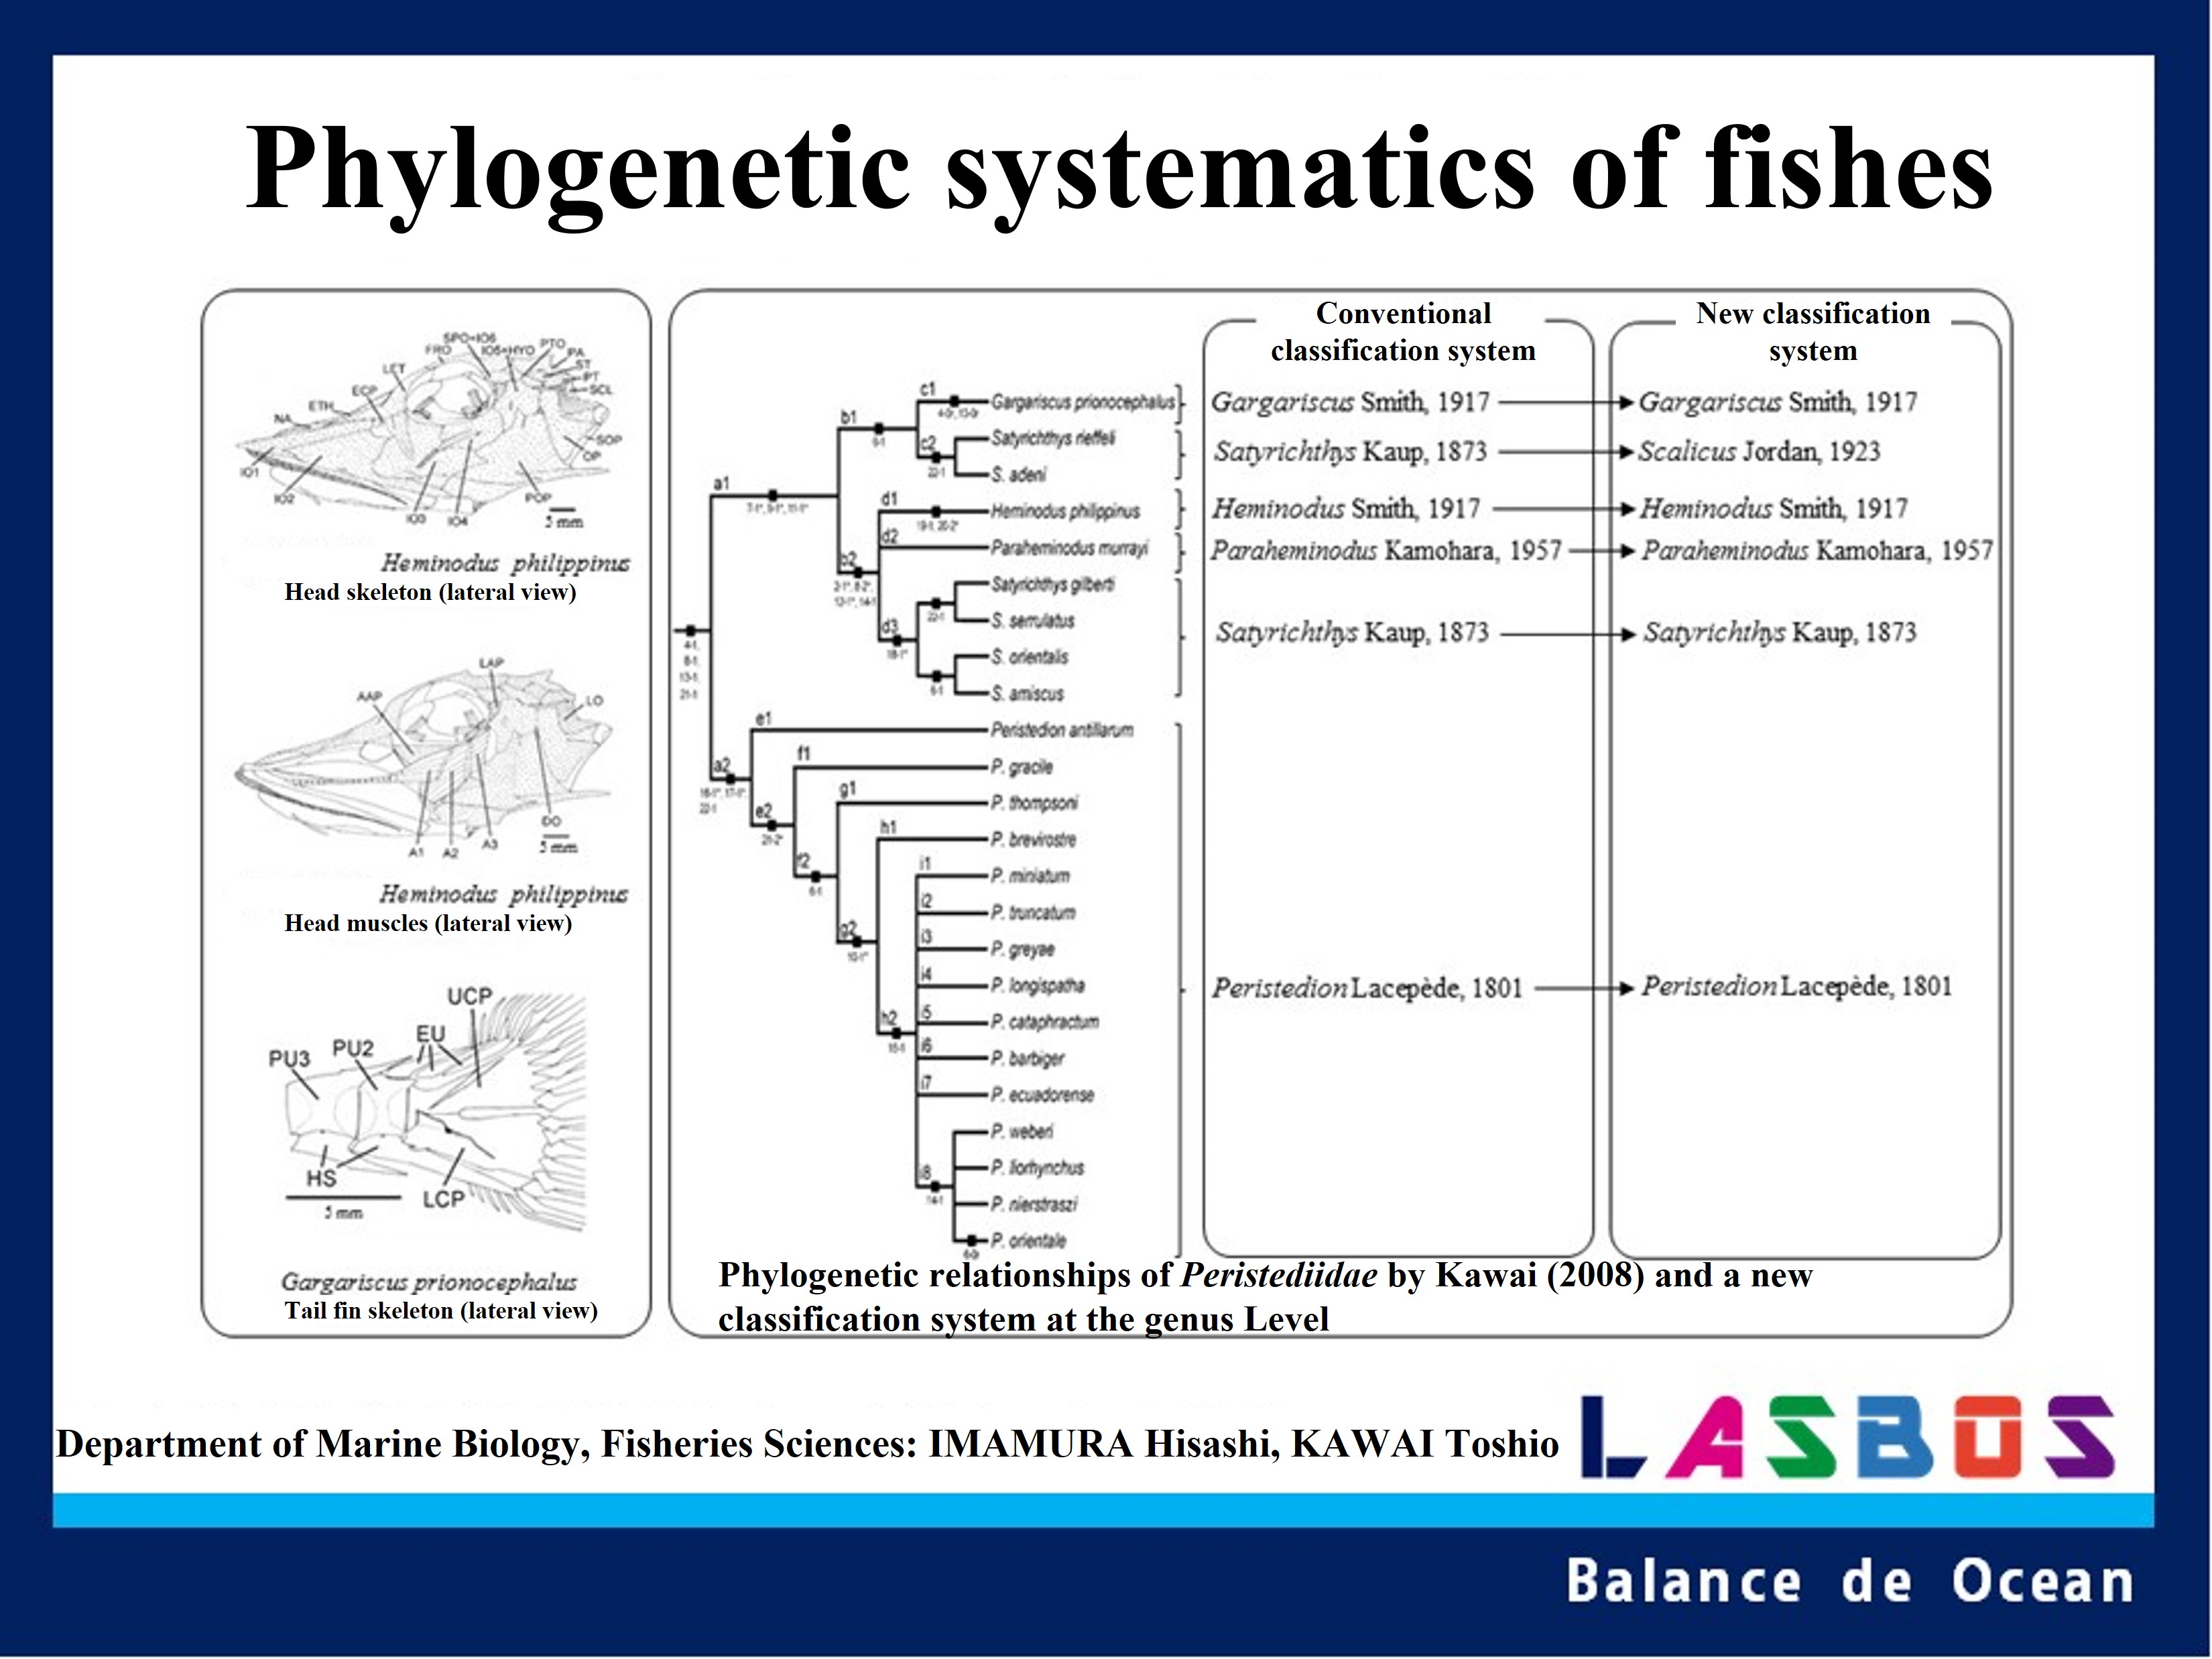 Phylogenetic systematics of fishes